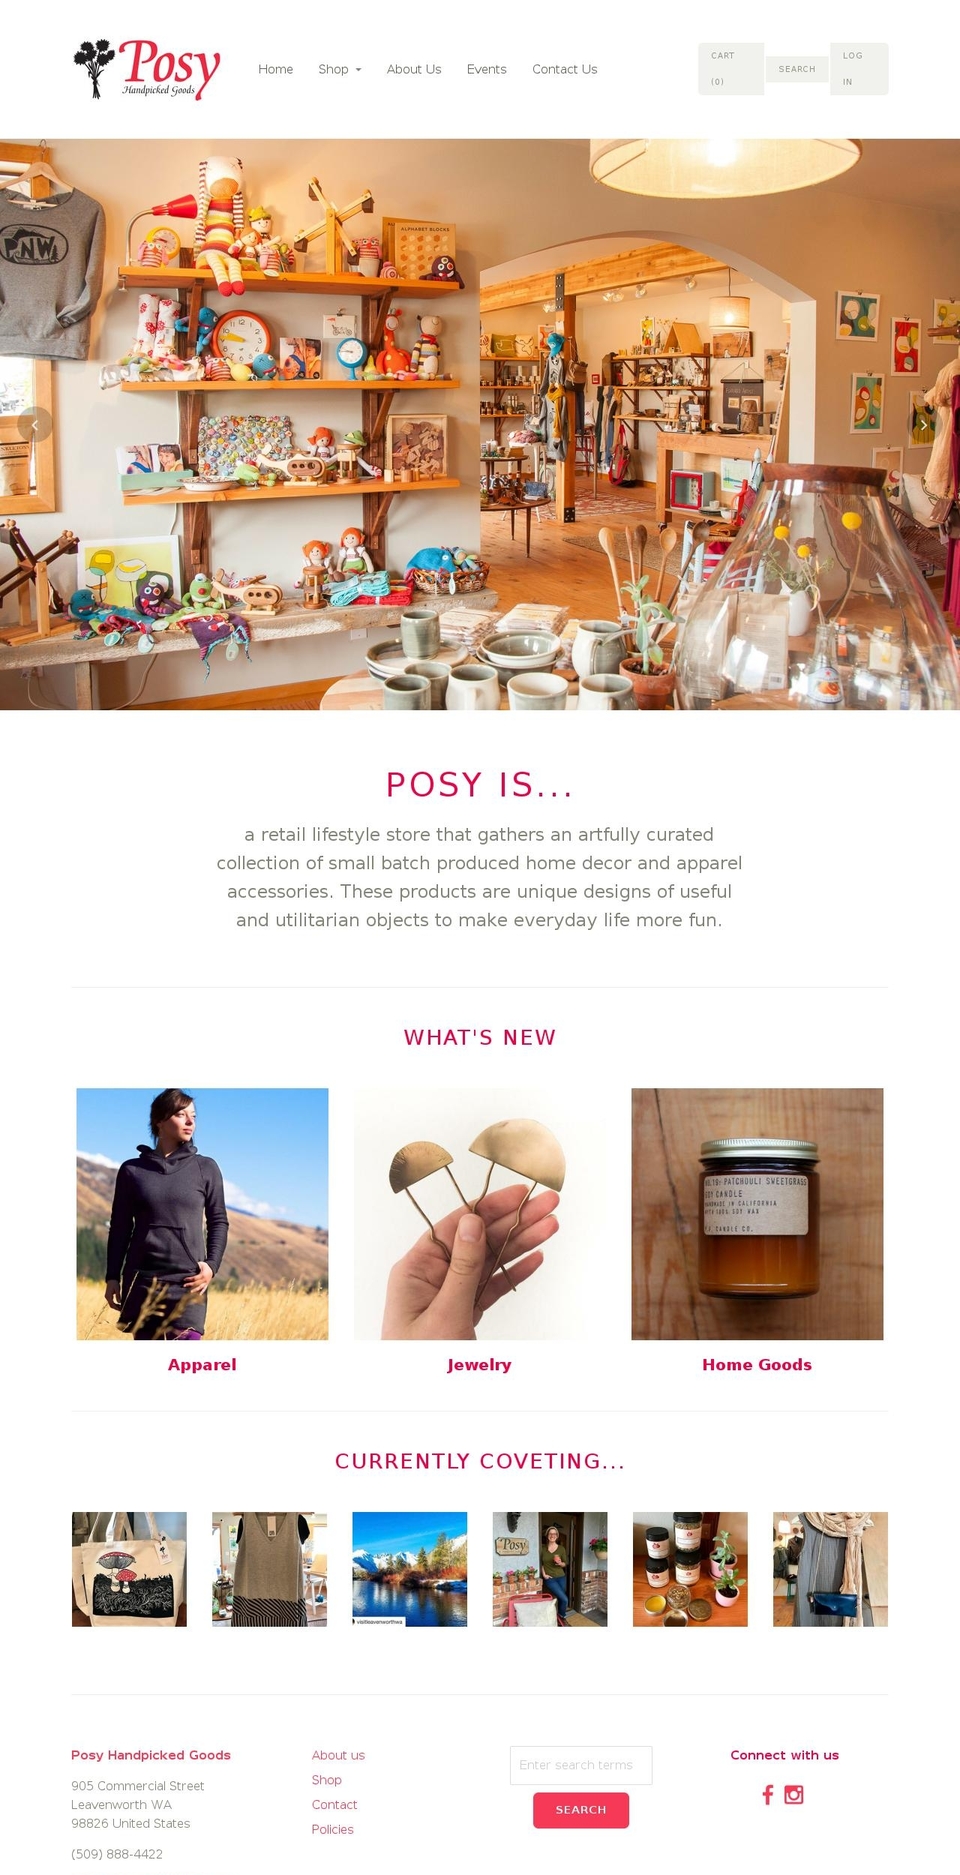 Cypress Shopify theme site example posyhandpicked.com